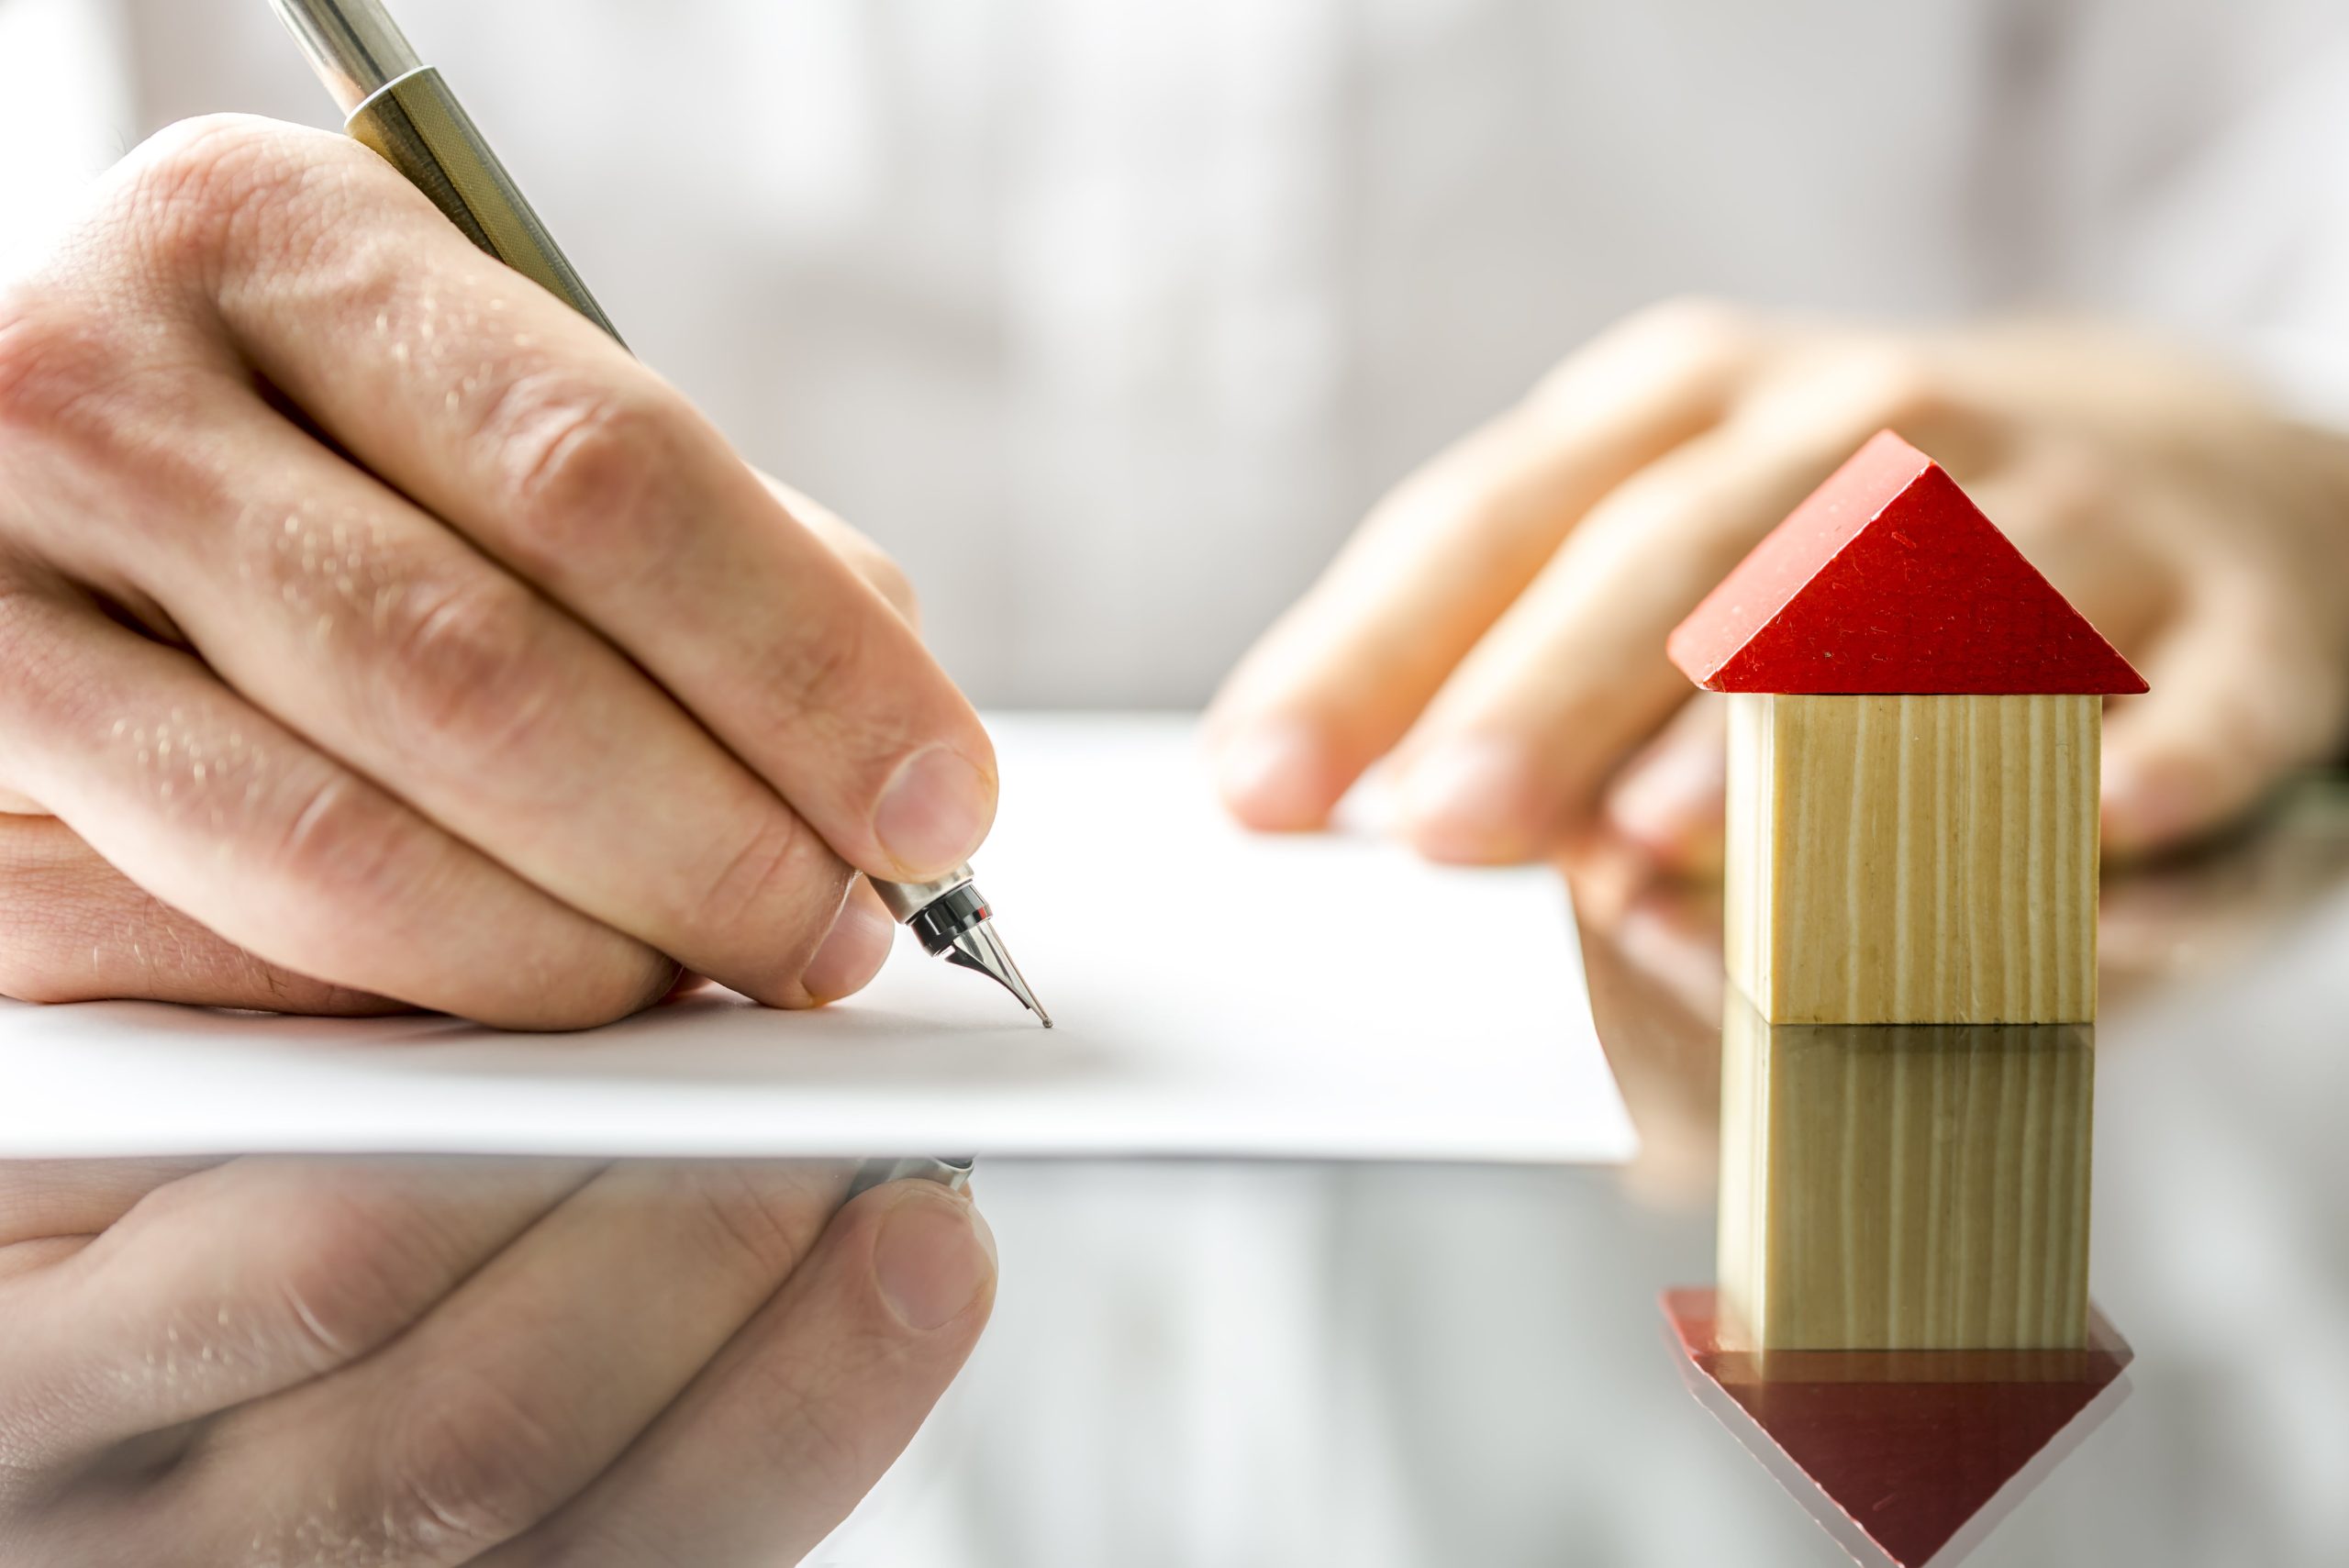 Man signing a document, contract or the deed of sale when buying a new house or selling his existing one with a small wooden model of a house alongside